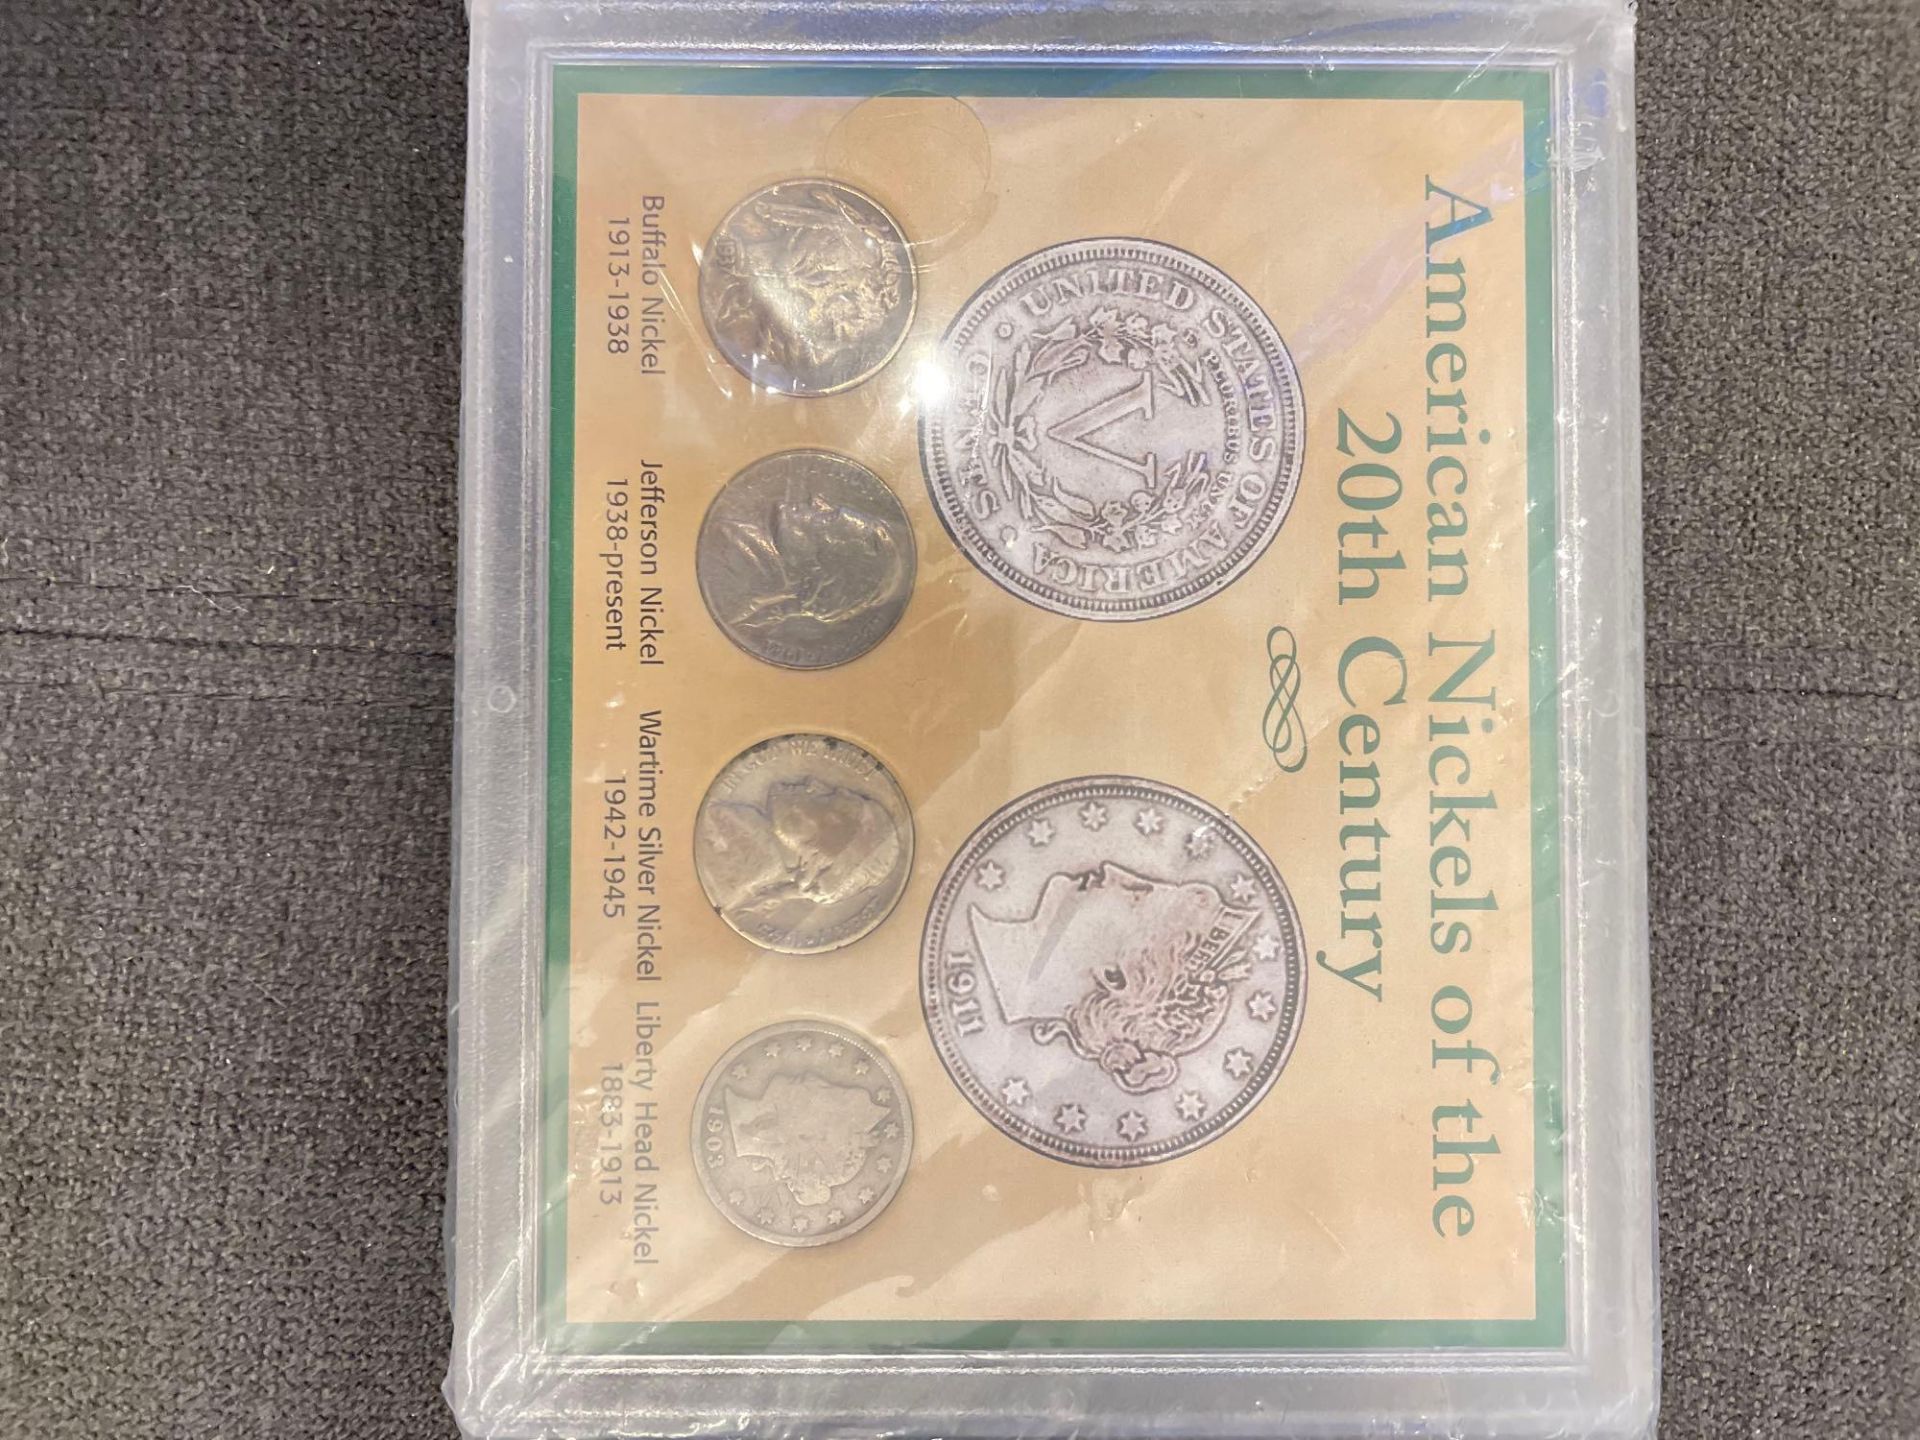 American Nickels of the 20th Century & Daily Dime Saver Souderton Savings book - Image 2 of 5